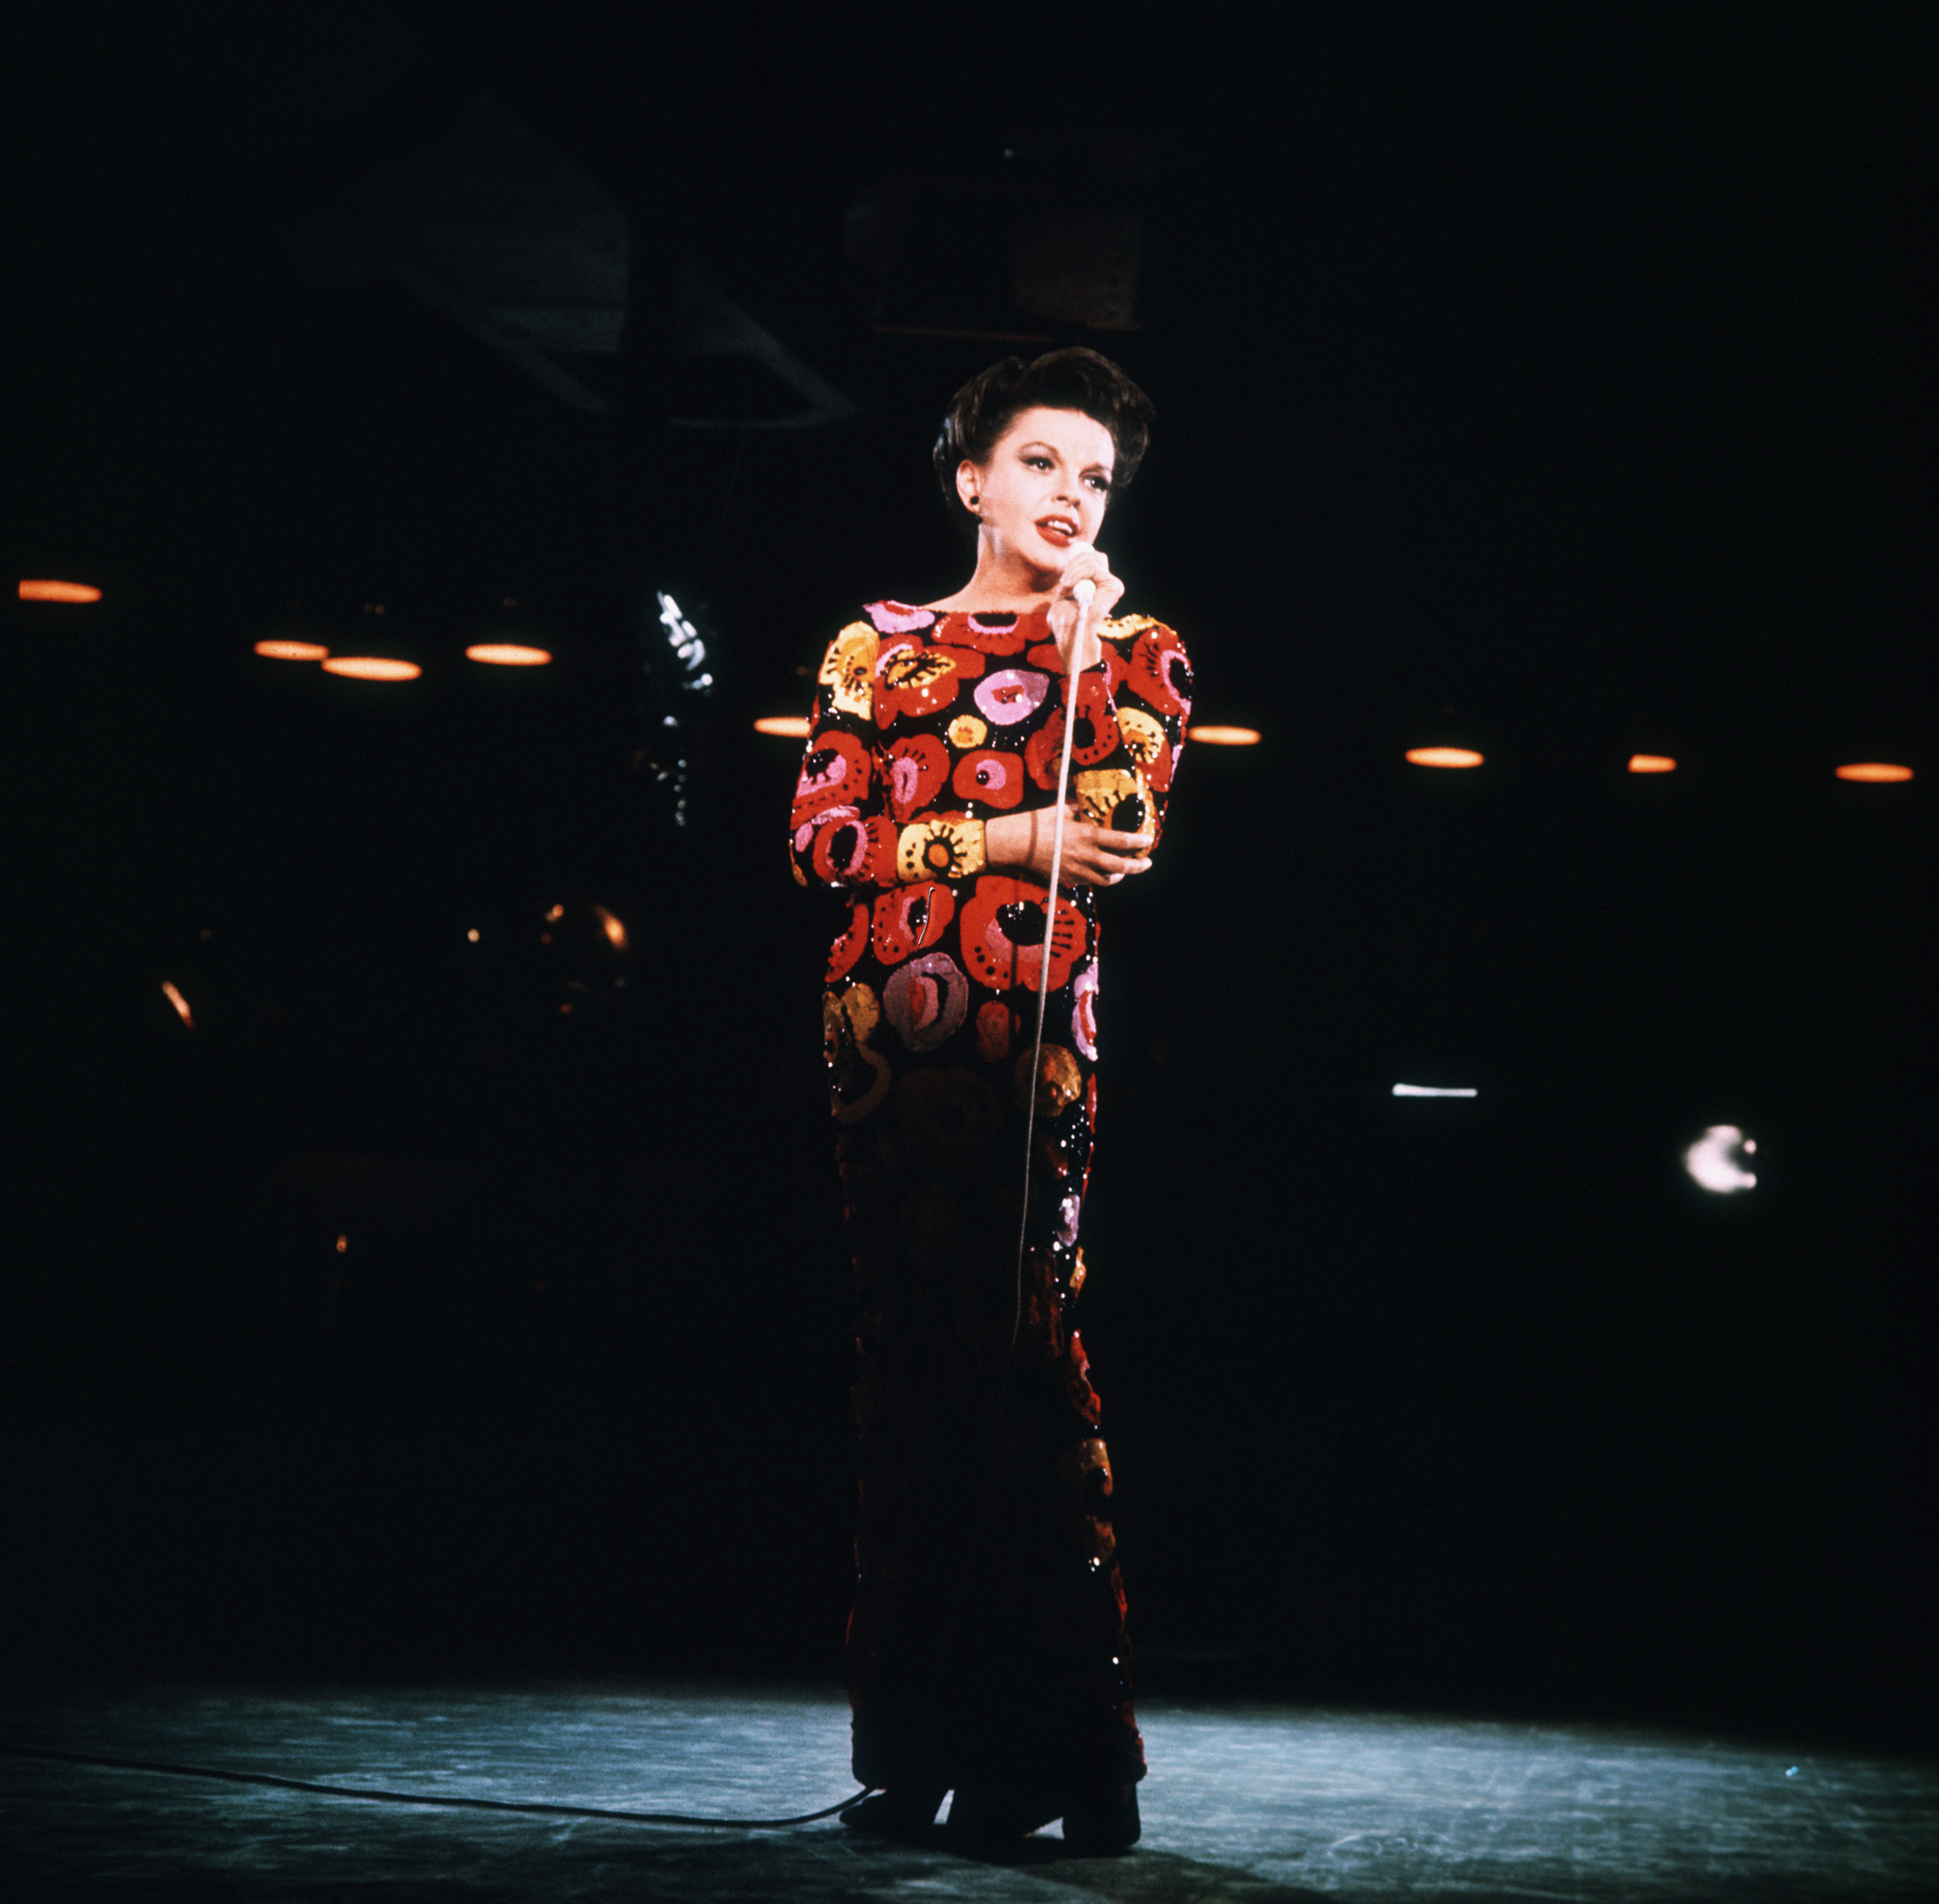 inger and actress Judy Garland appears in concert. (Hulton Deutsch—Corbis/Getty Images S)